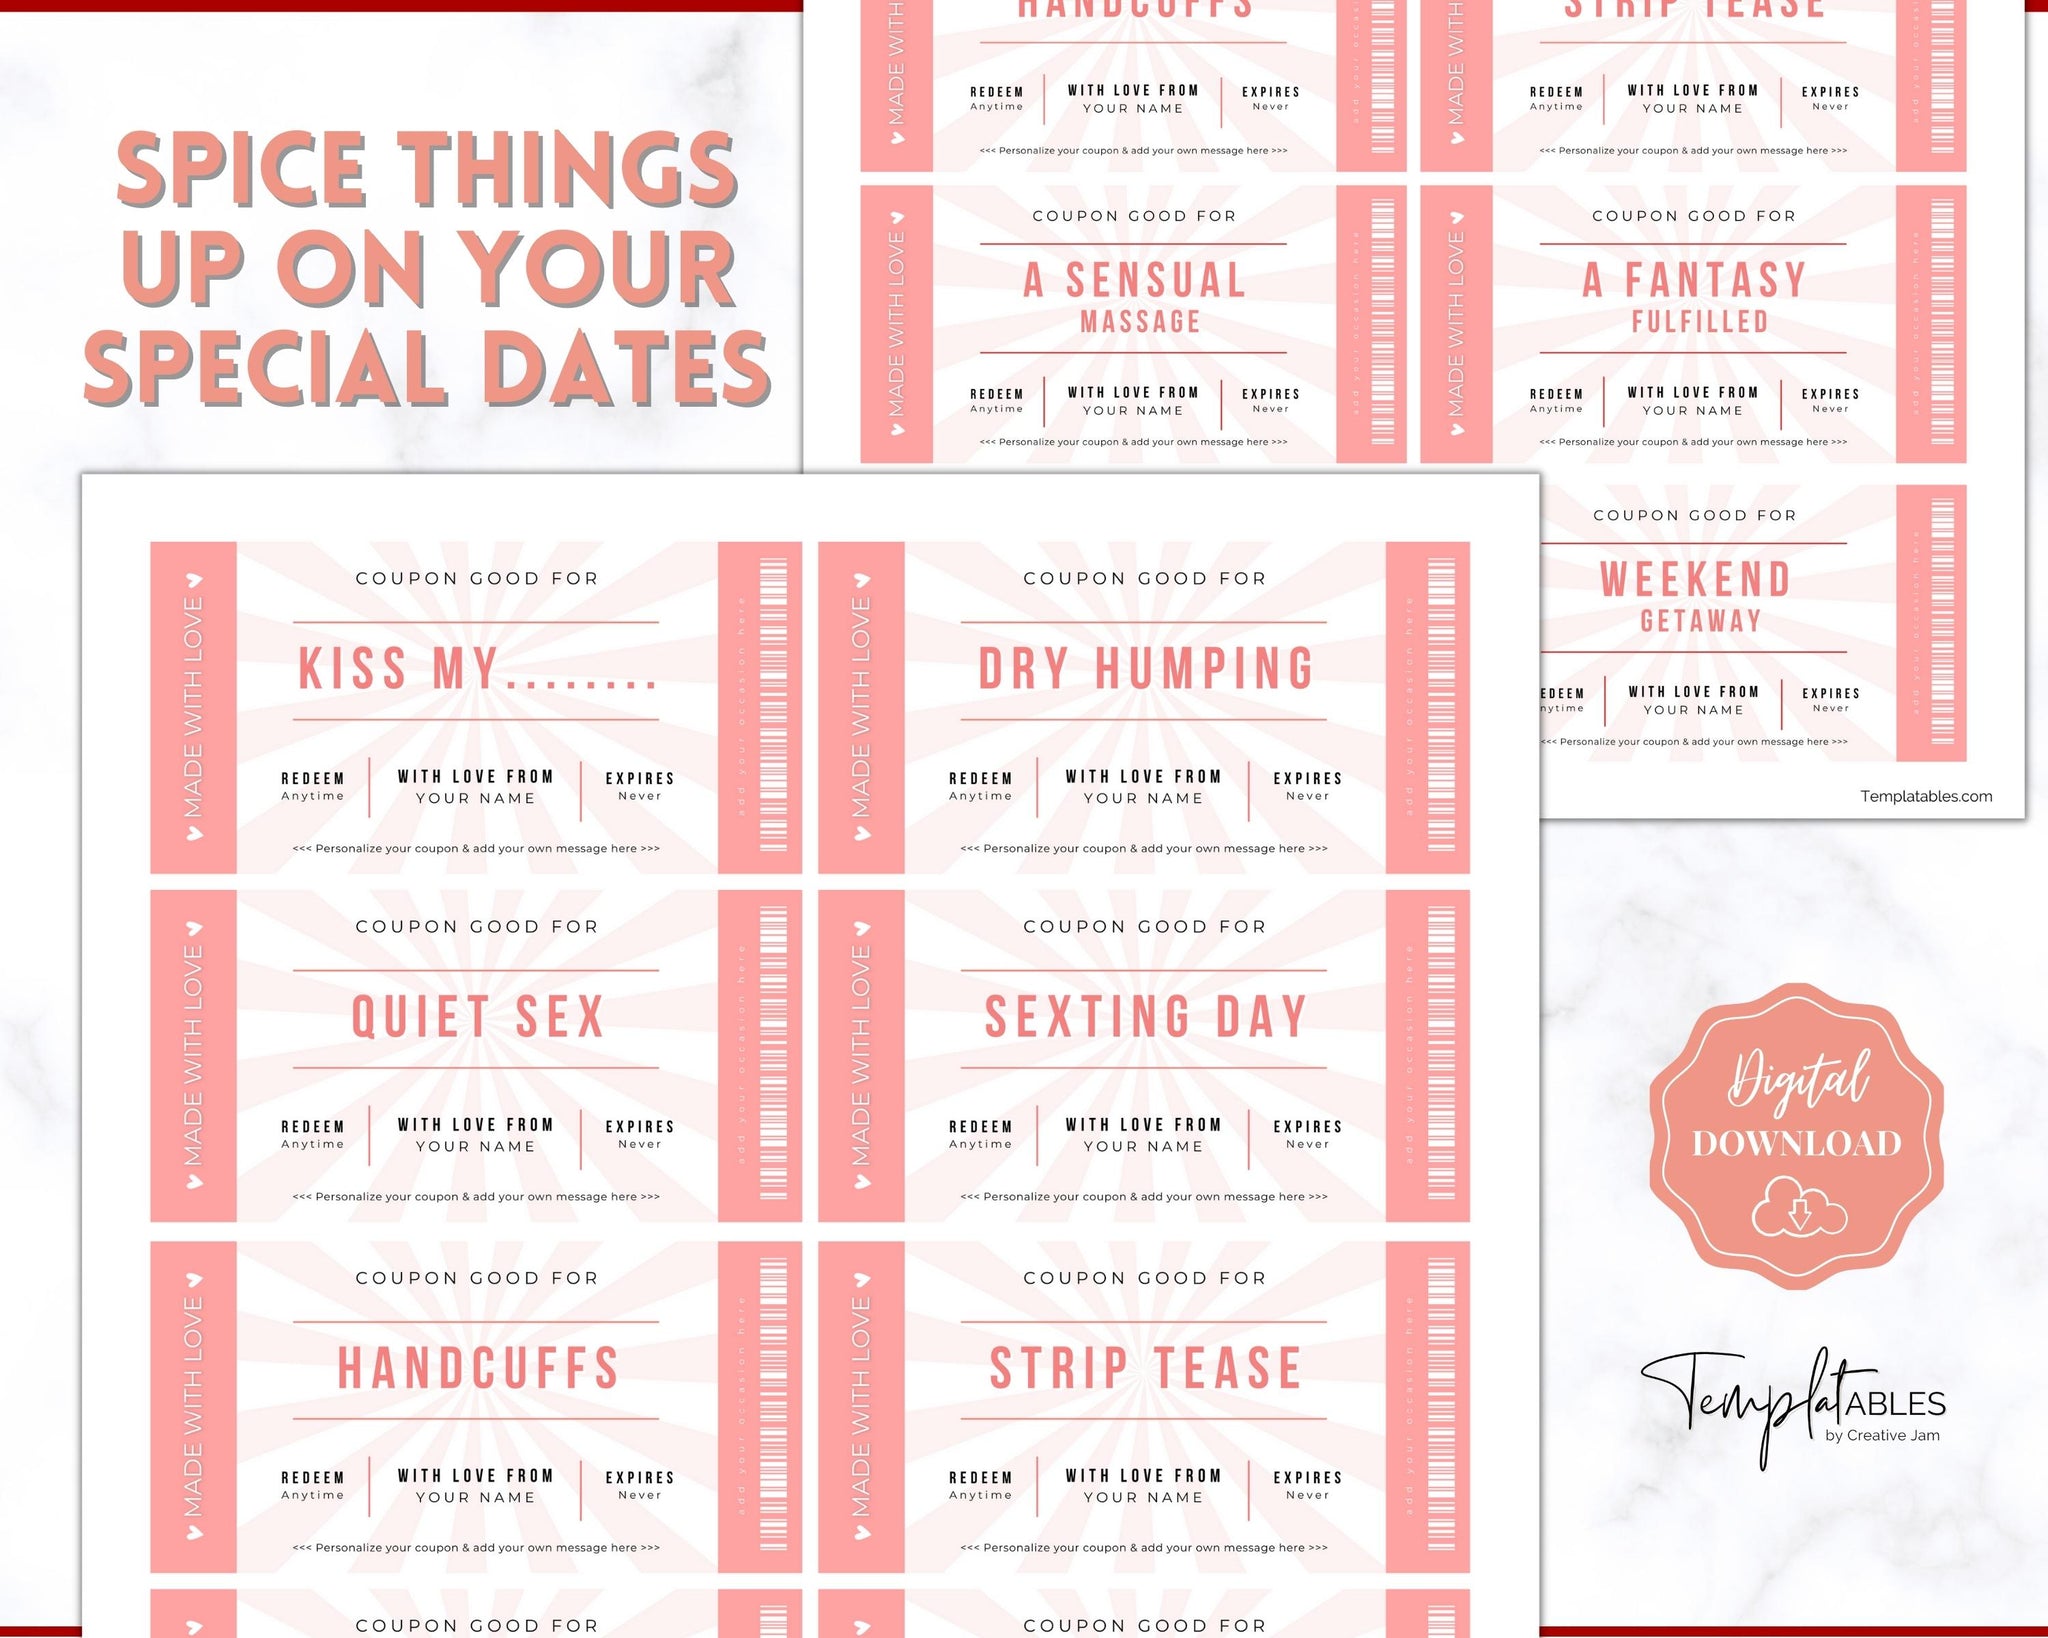 Sex Things for Boyfriend: Sex Coupons Book and Vouchers: Sex